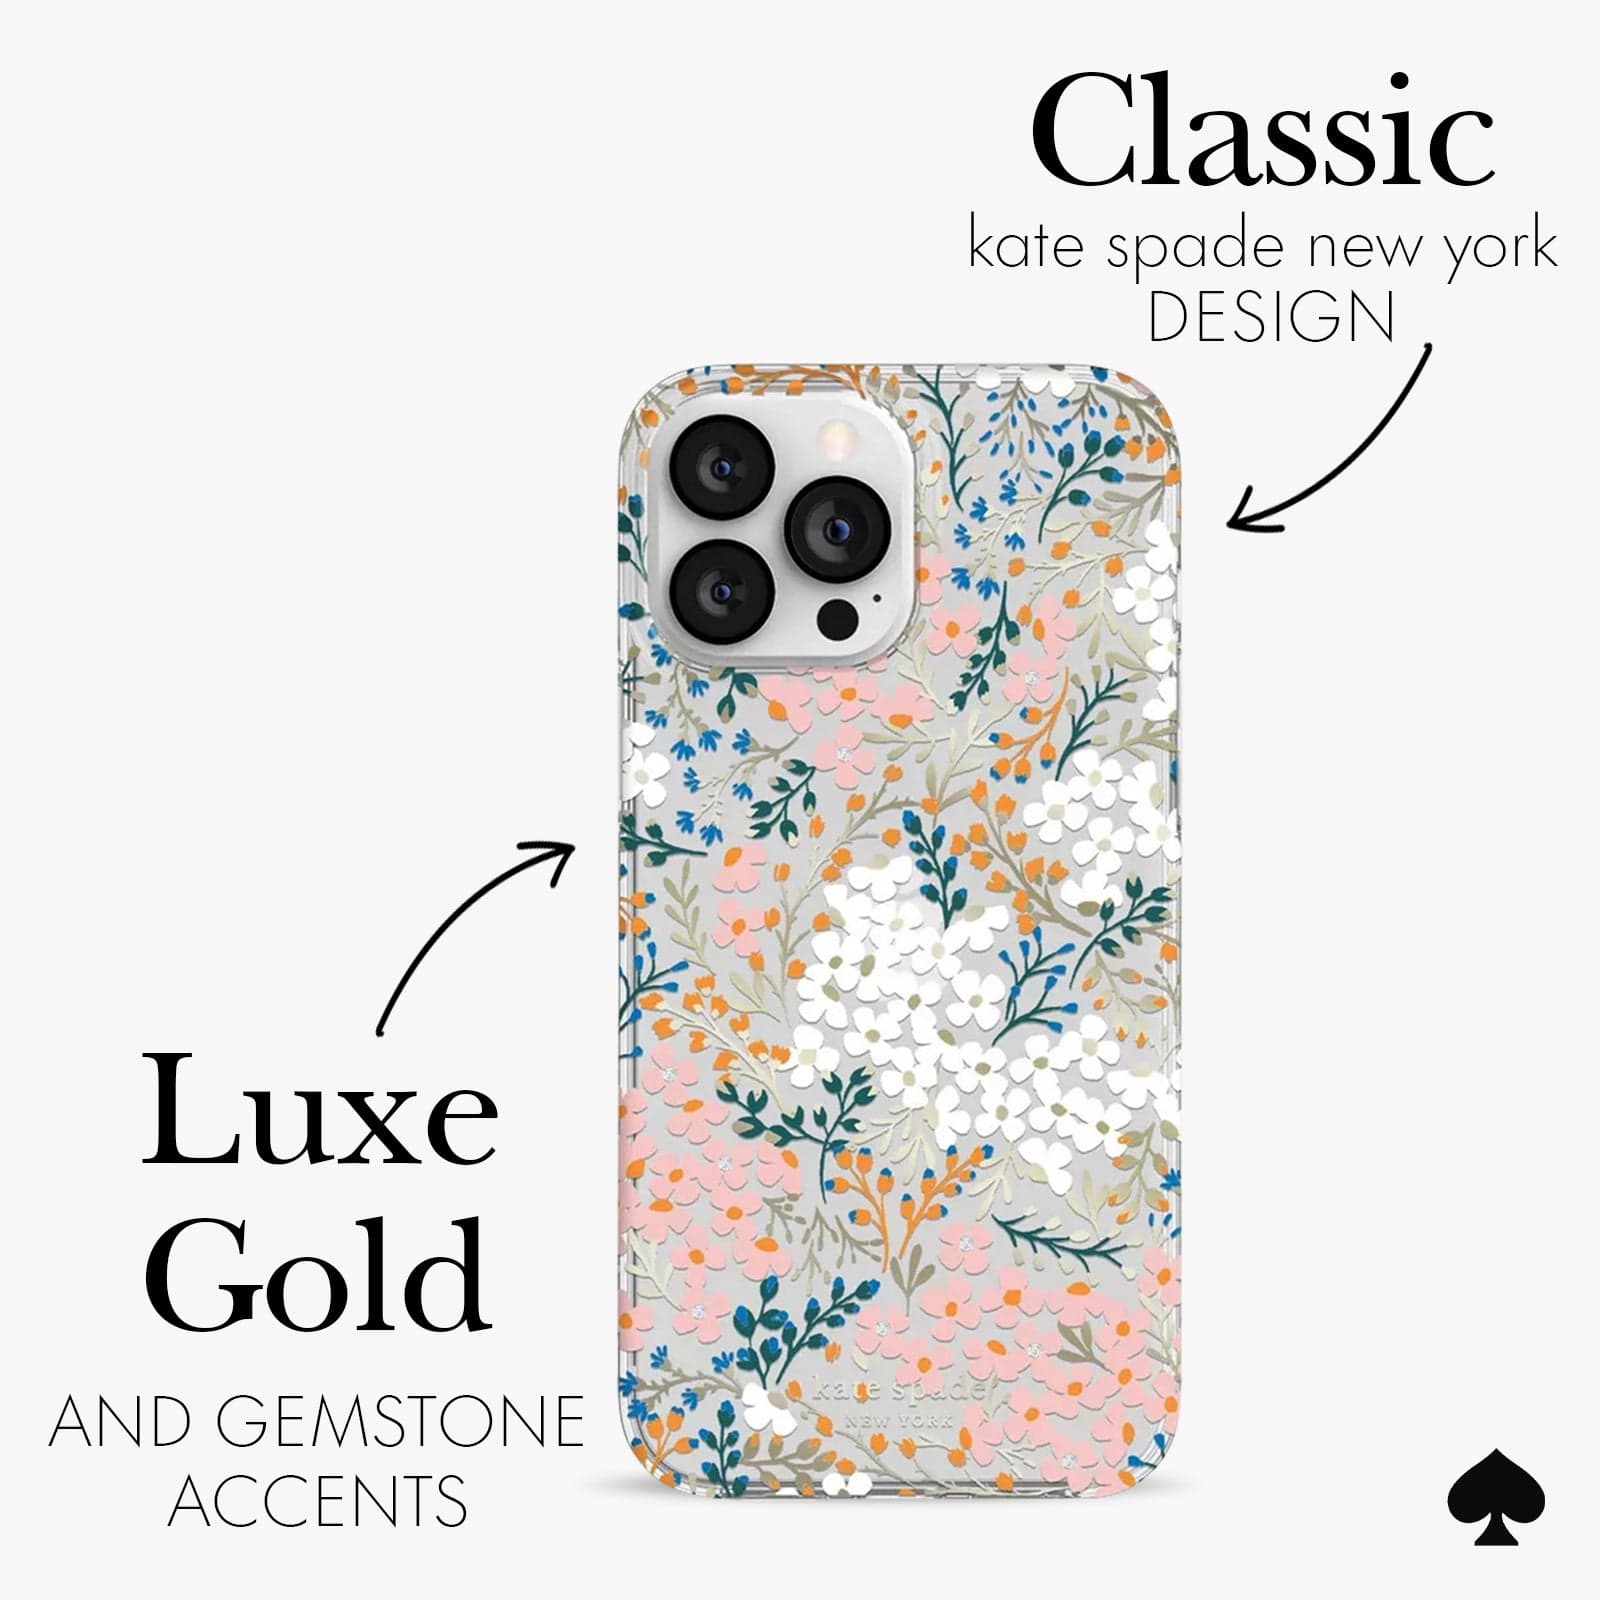 classic kate spade new york design and luxe gold gemstone accents